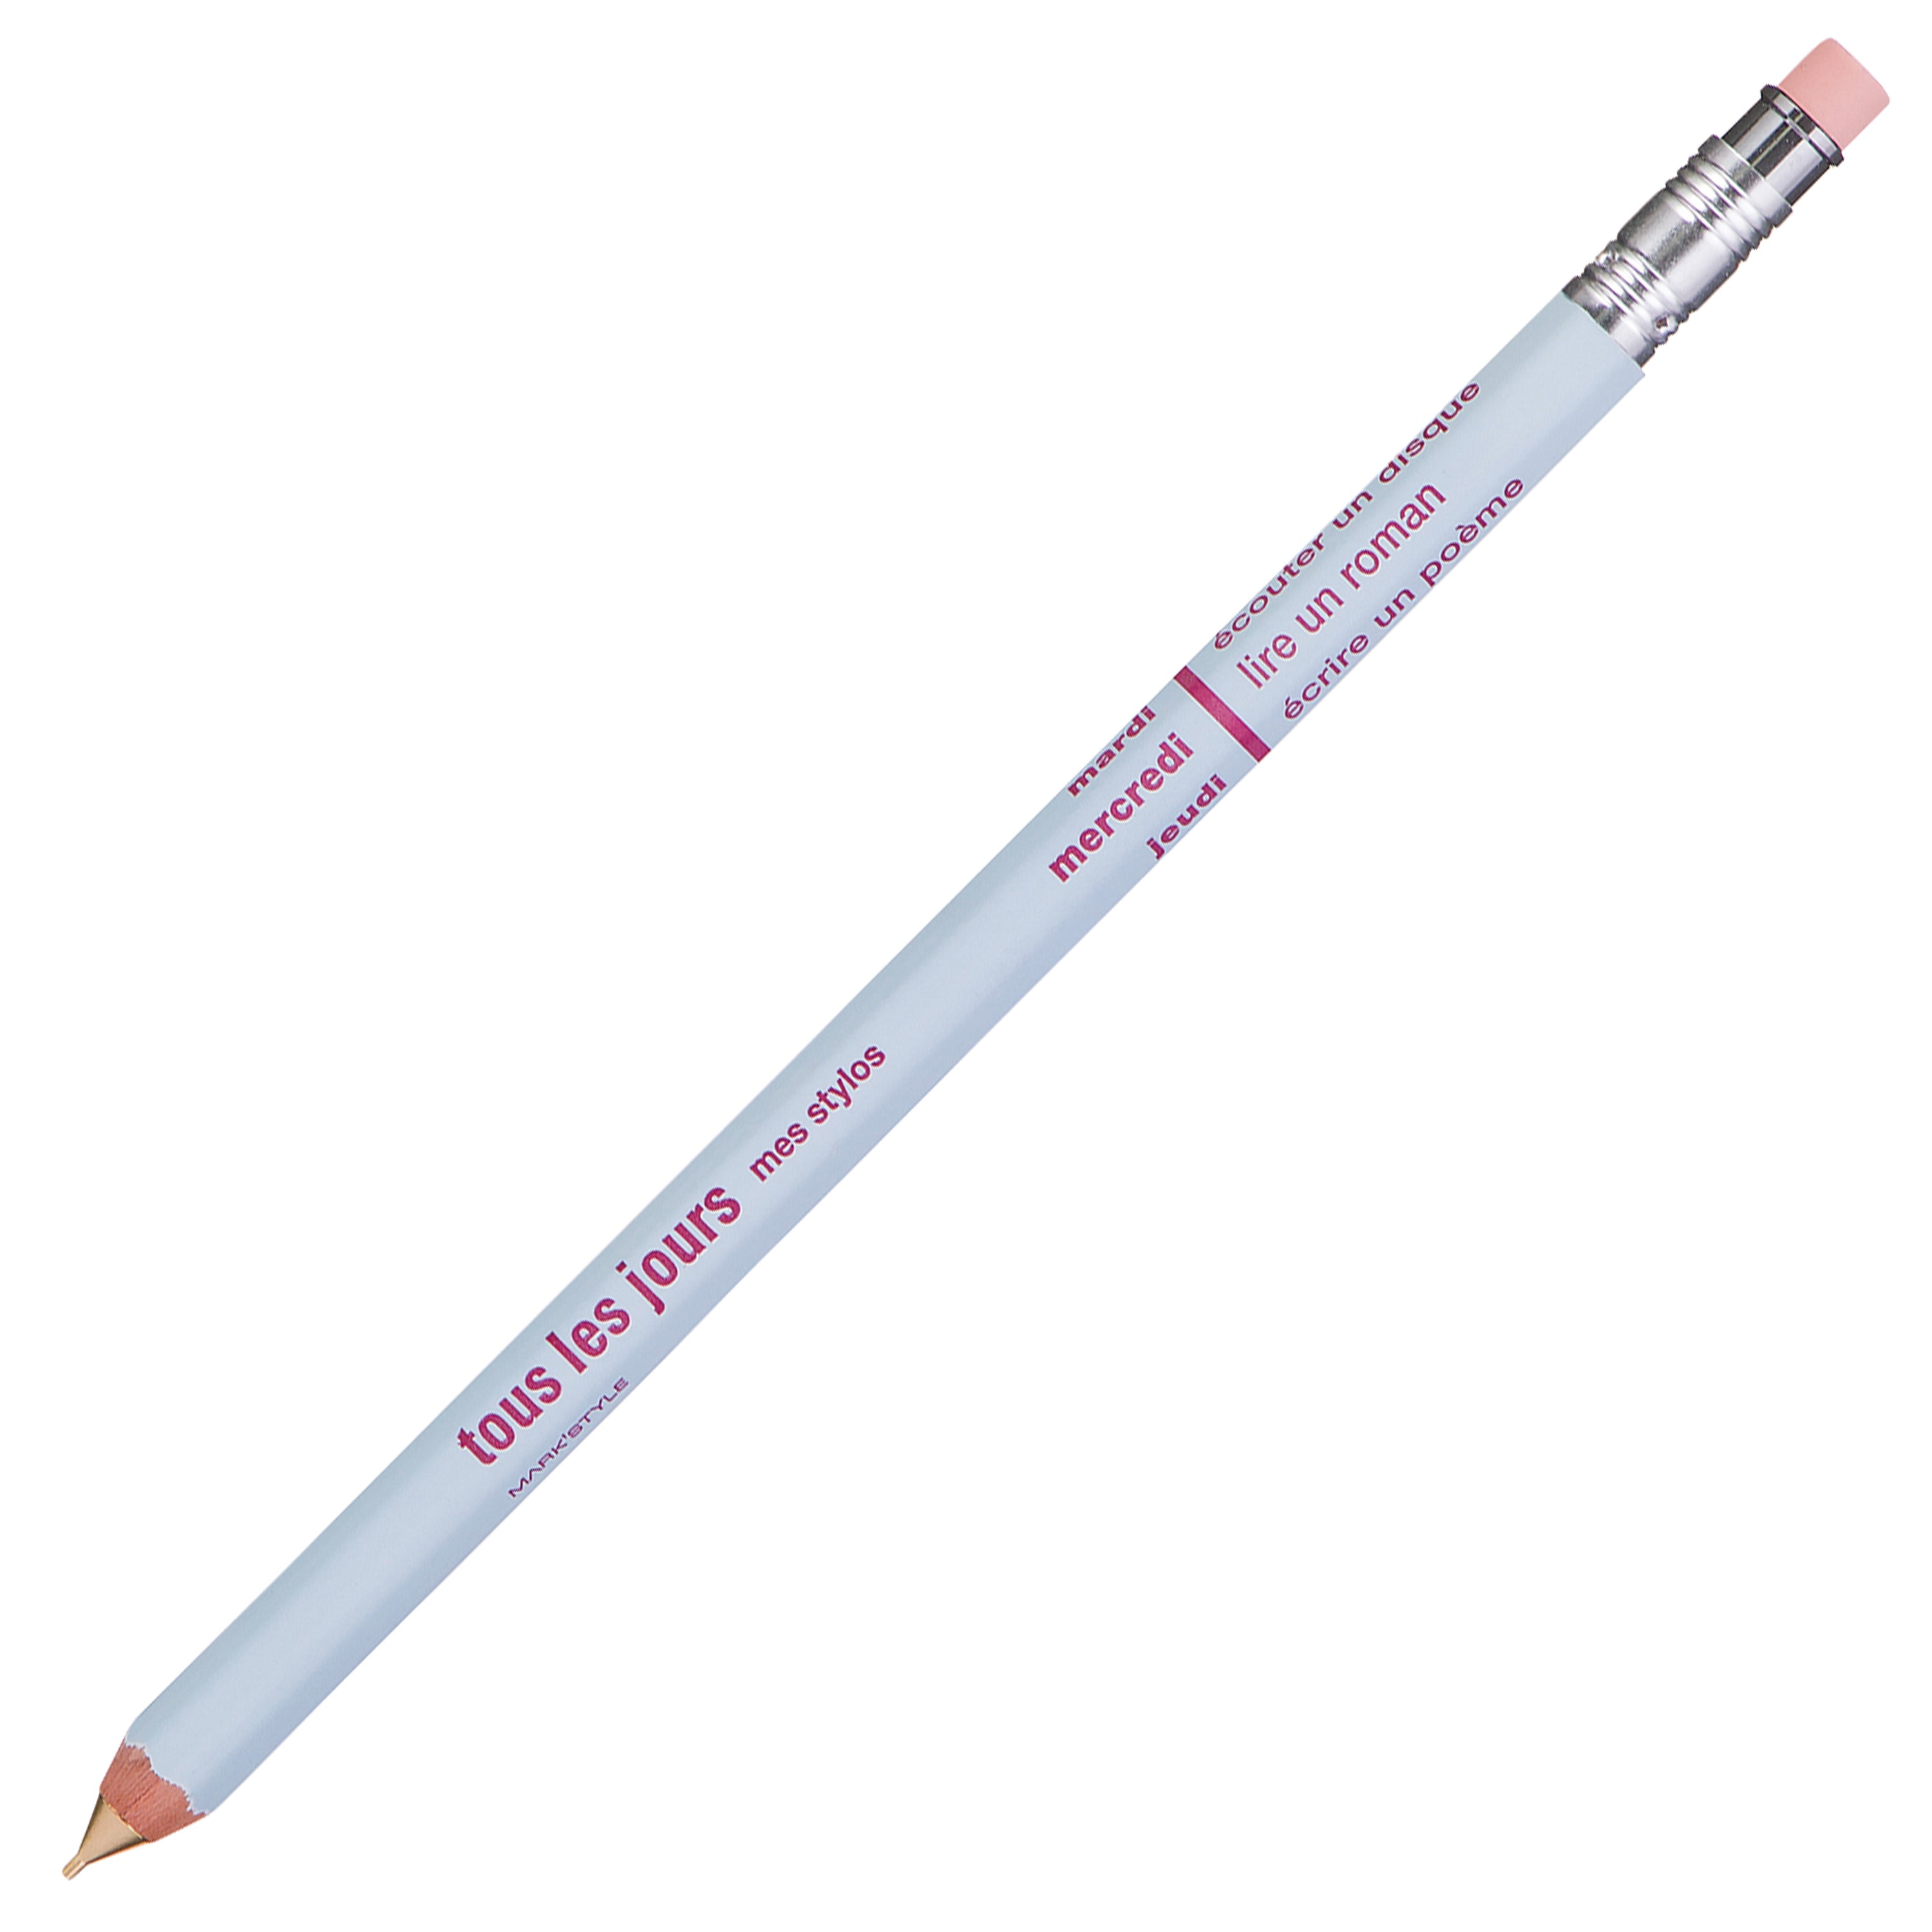 DAY Mechanical Pencil with Eraser / Light Blue